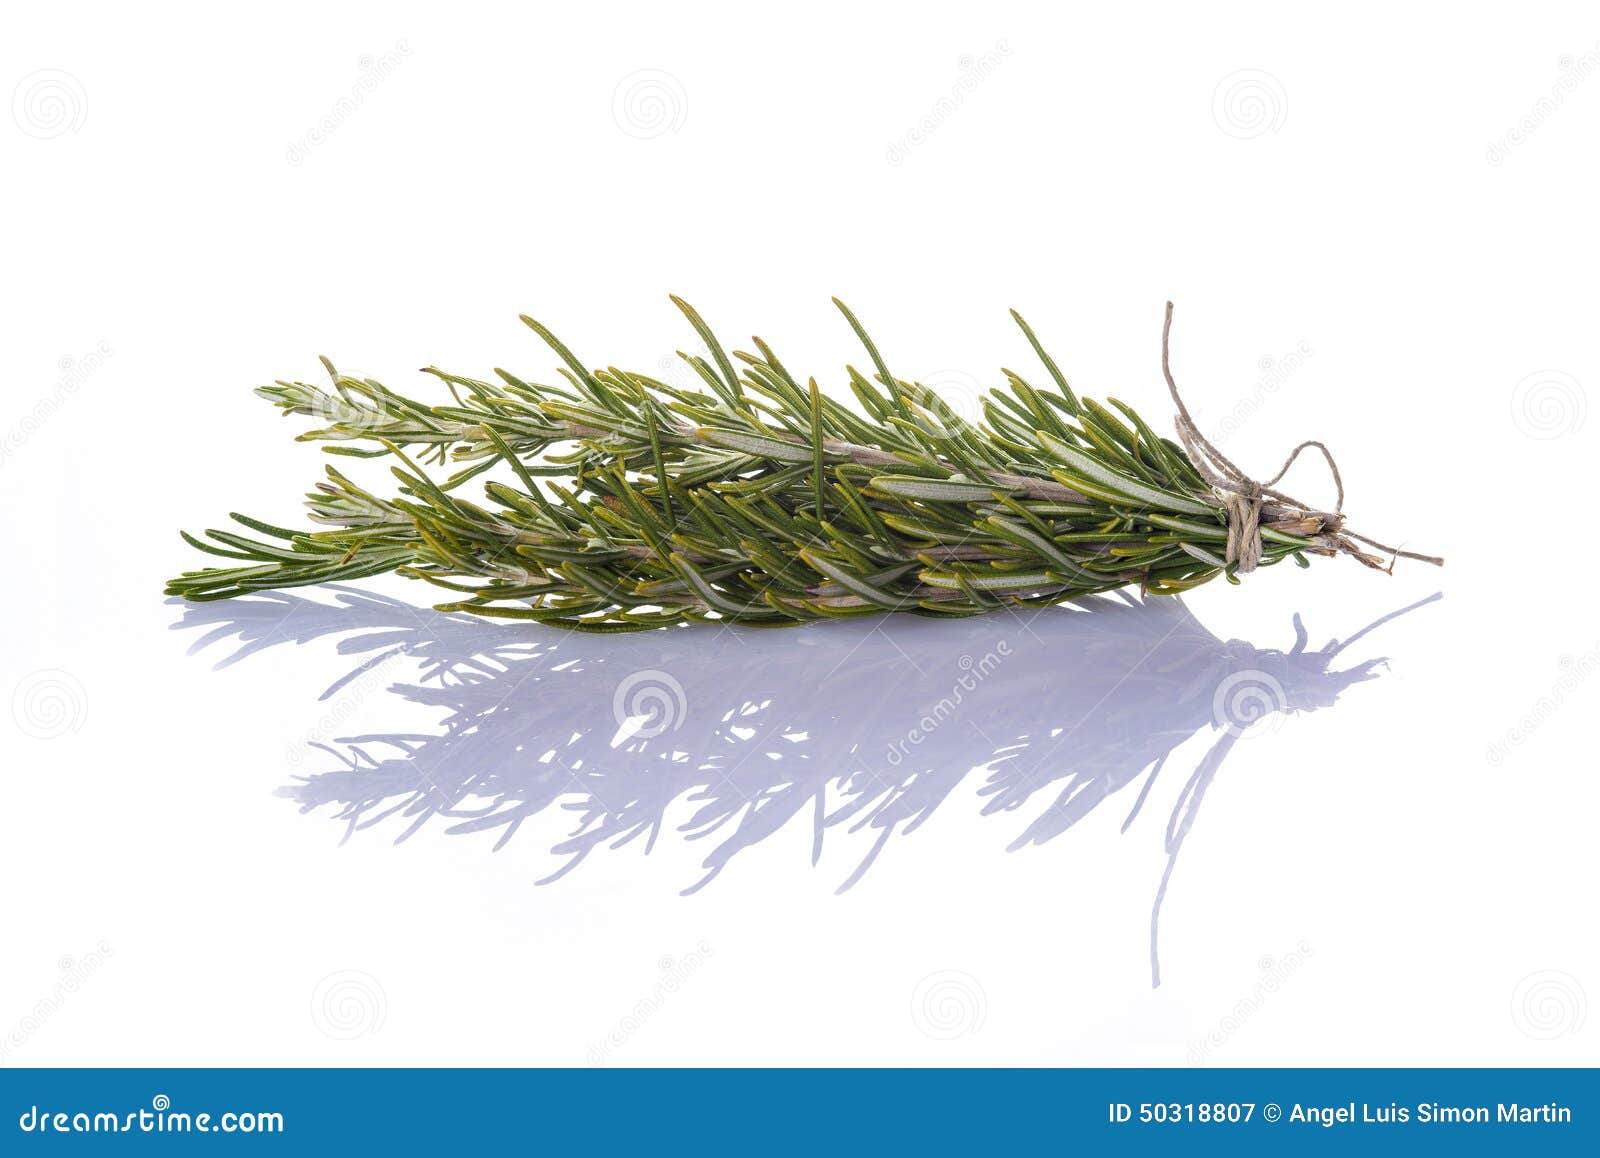 bunch of rosemary on a white background